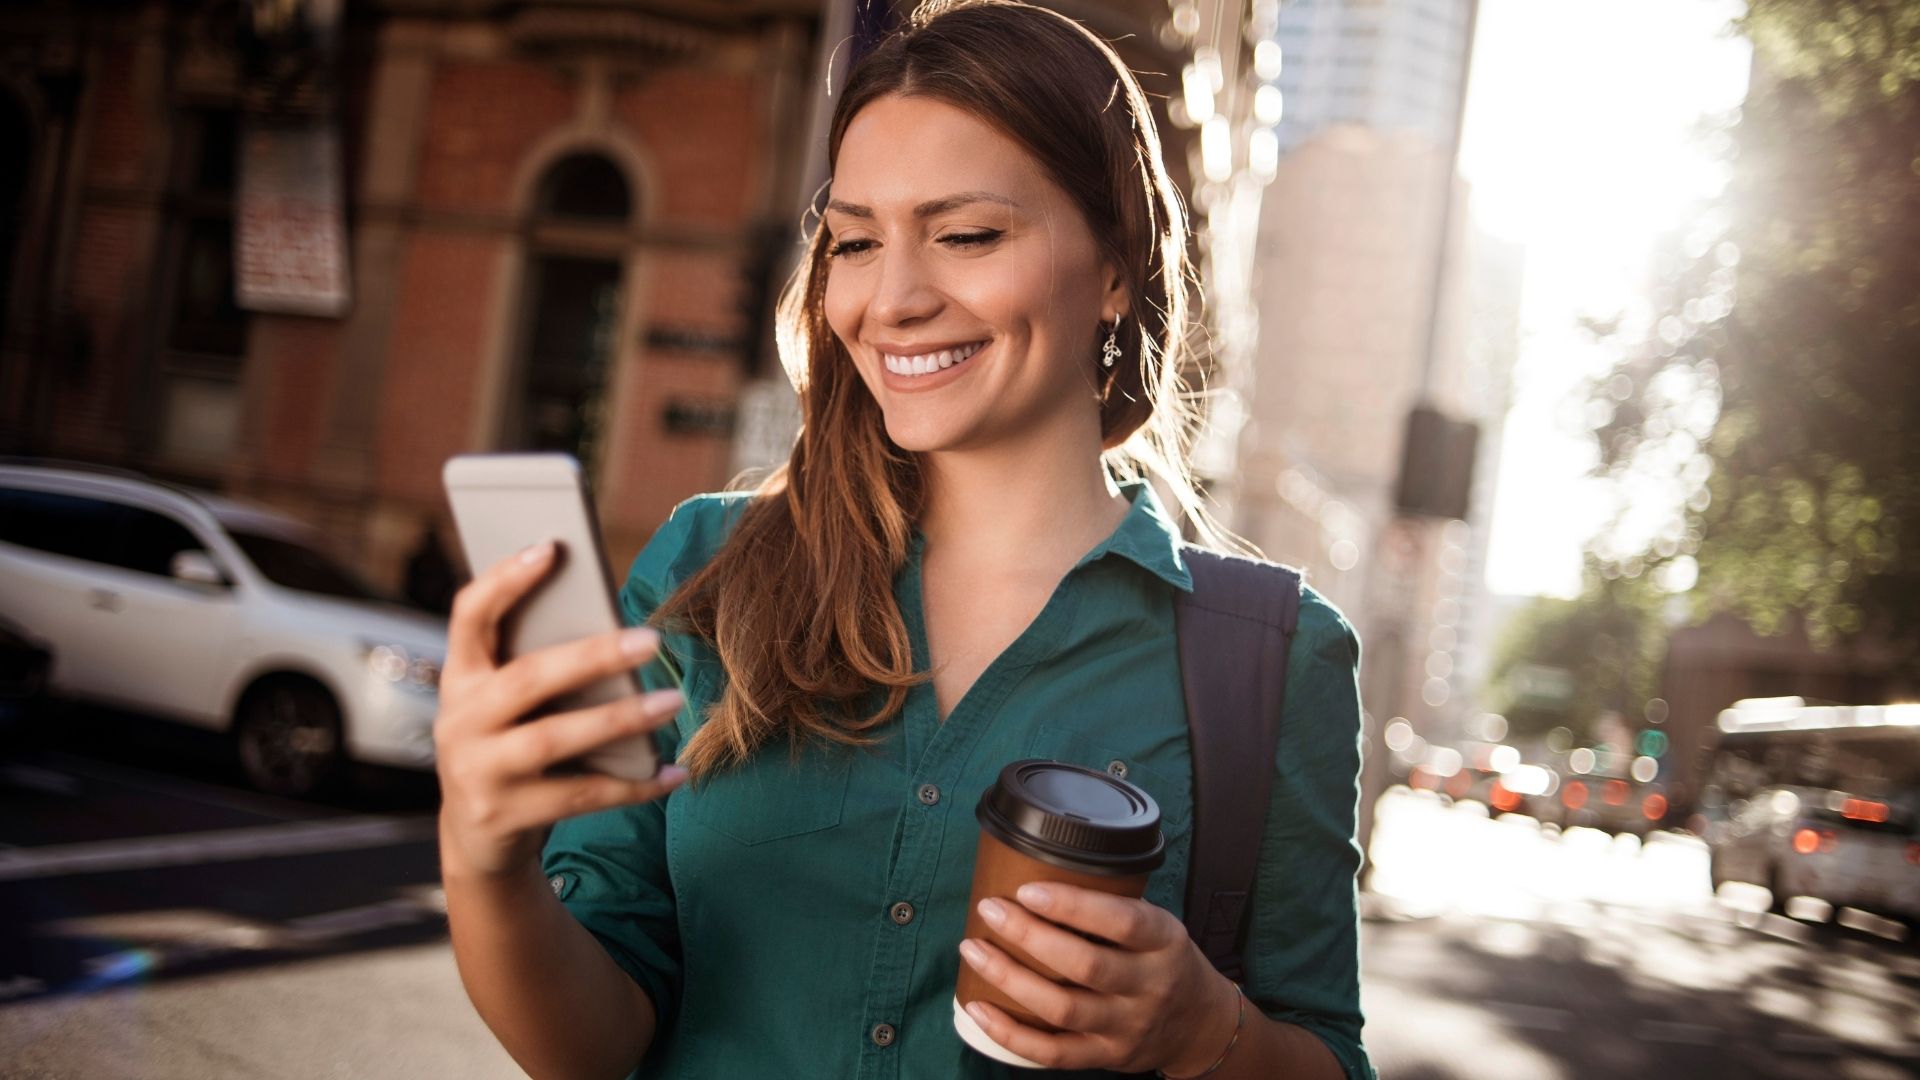 Background for 'Social engament', a woman smiling at her smartphone